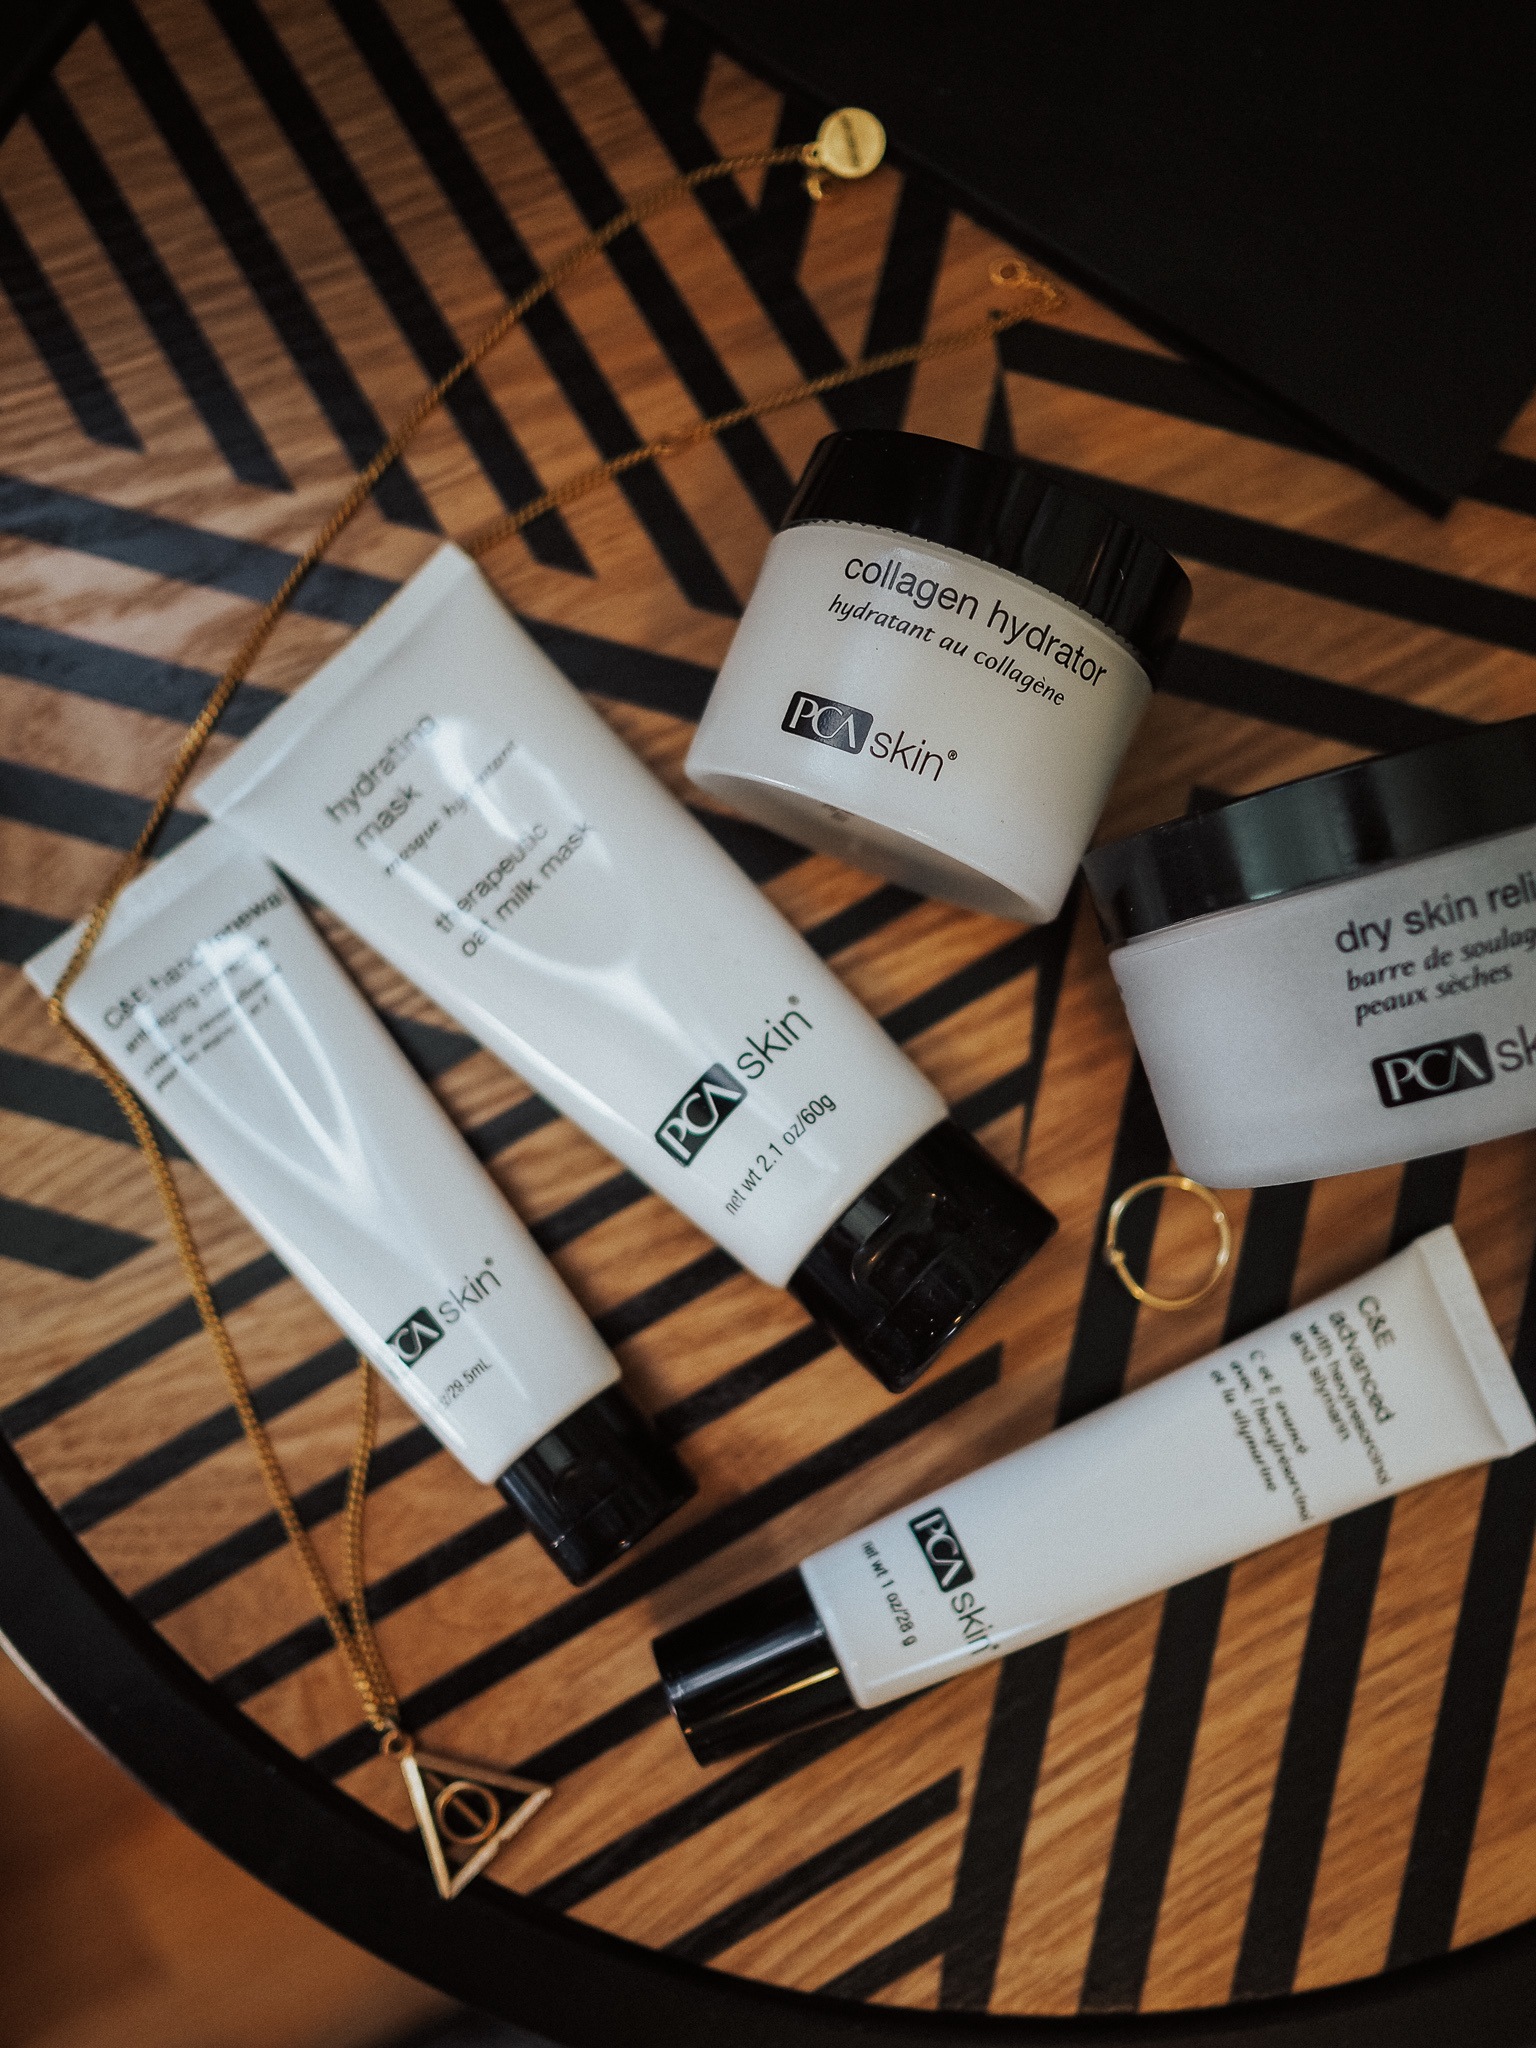 Always wanted to try PCA skin products but didn't know where to start? Find out the best PCA skin products for dry skin in this blog post.